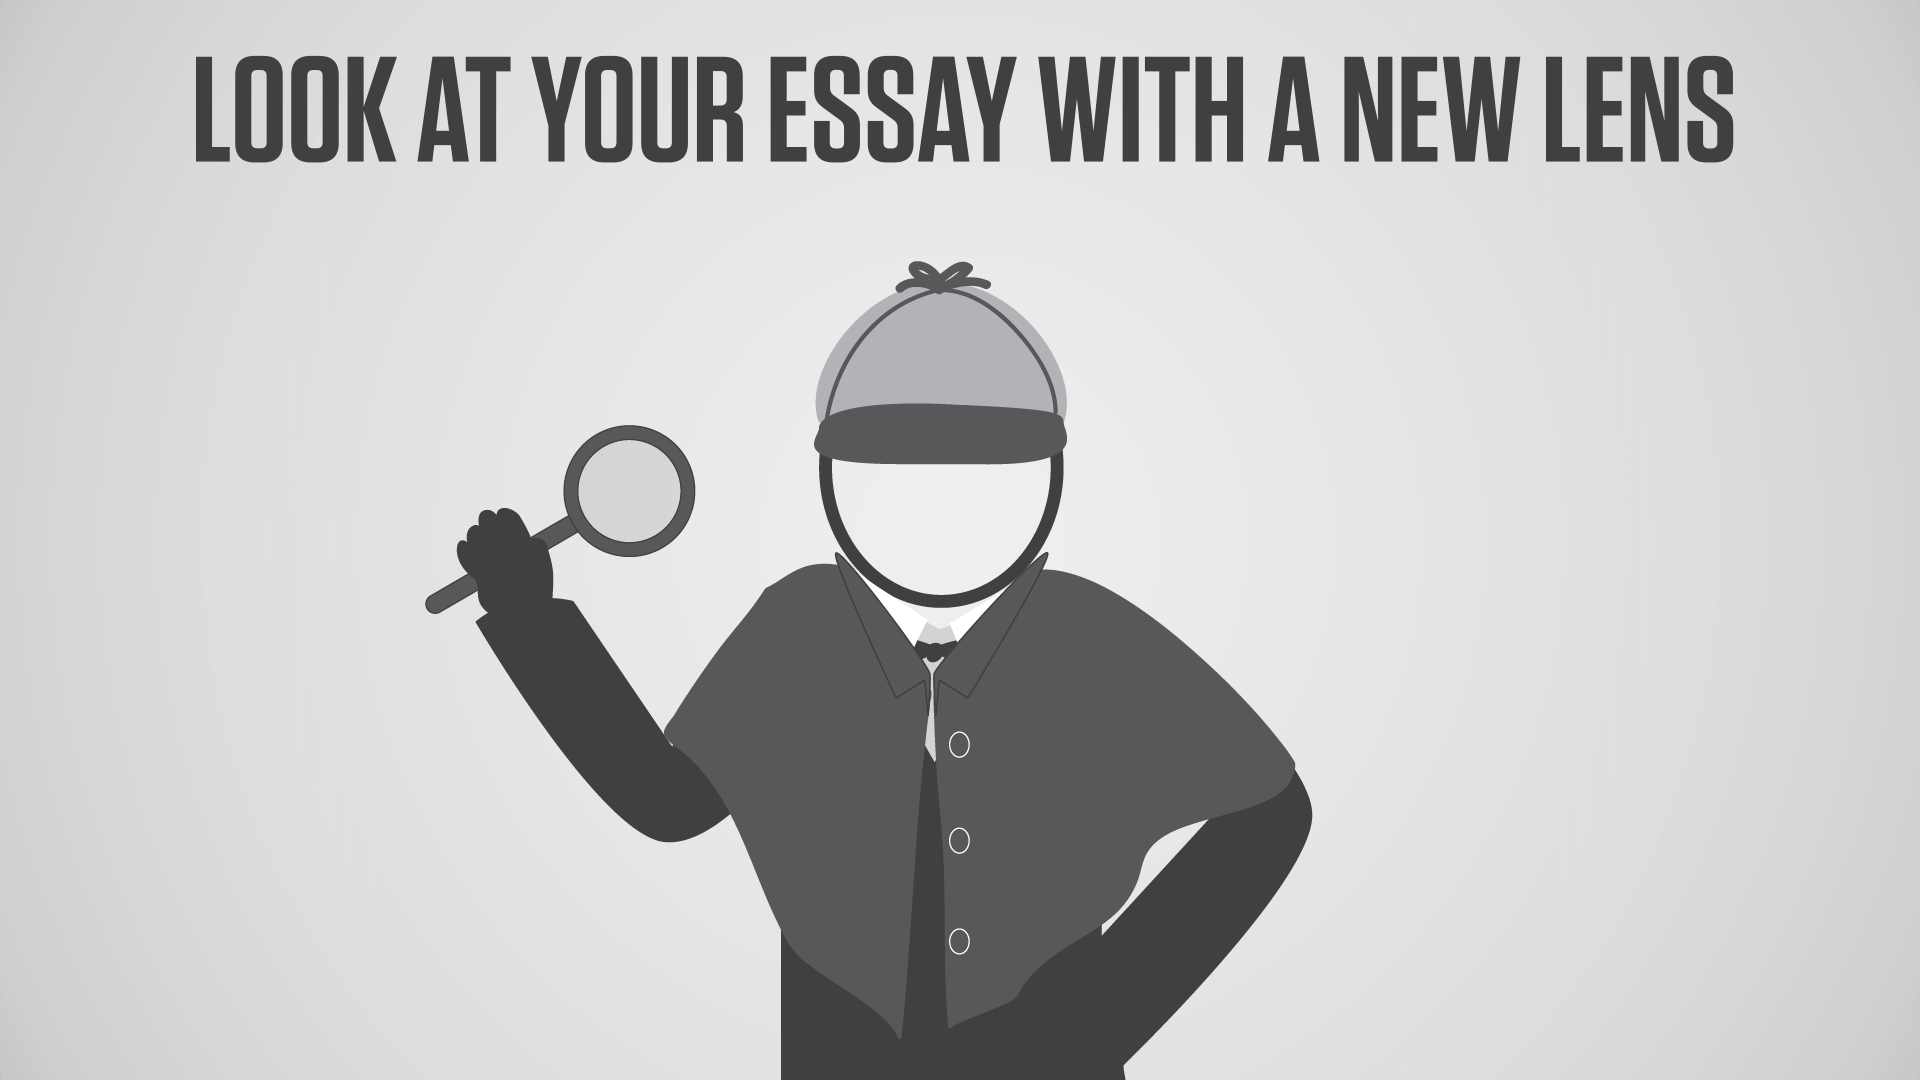 Final Tips for Improving Your College Essay Draft